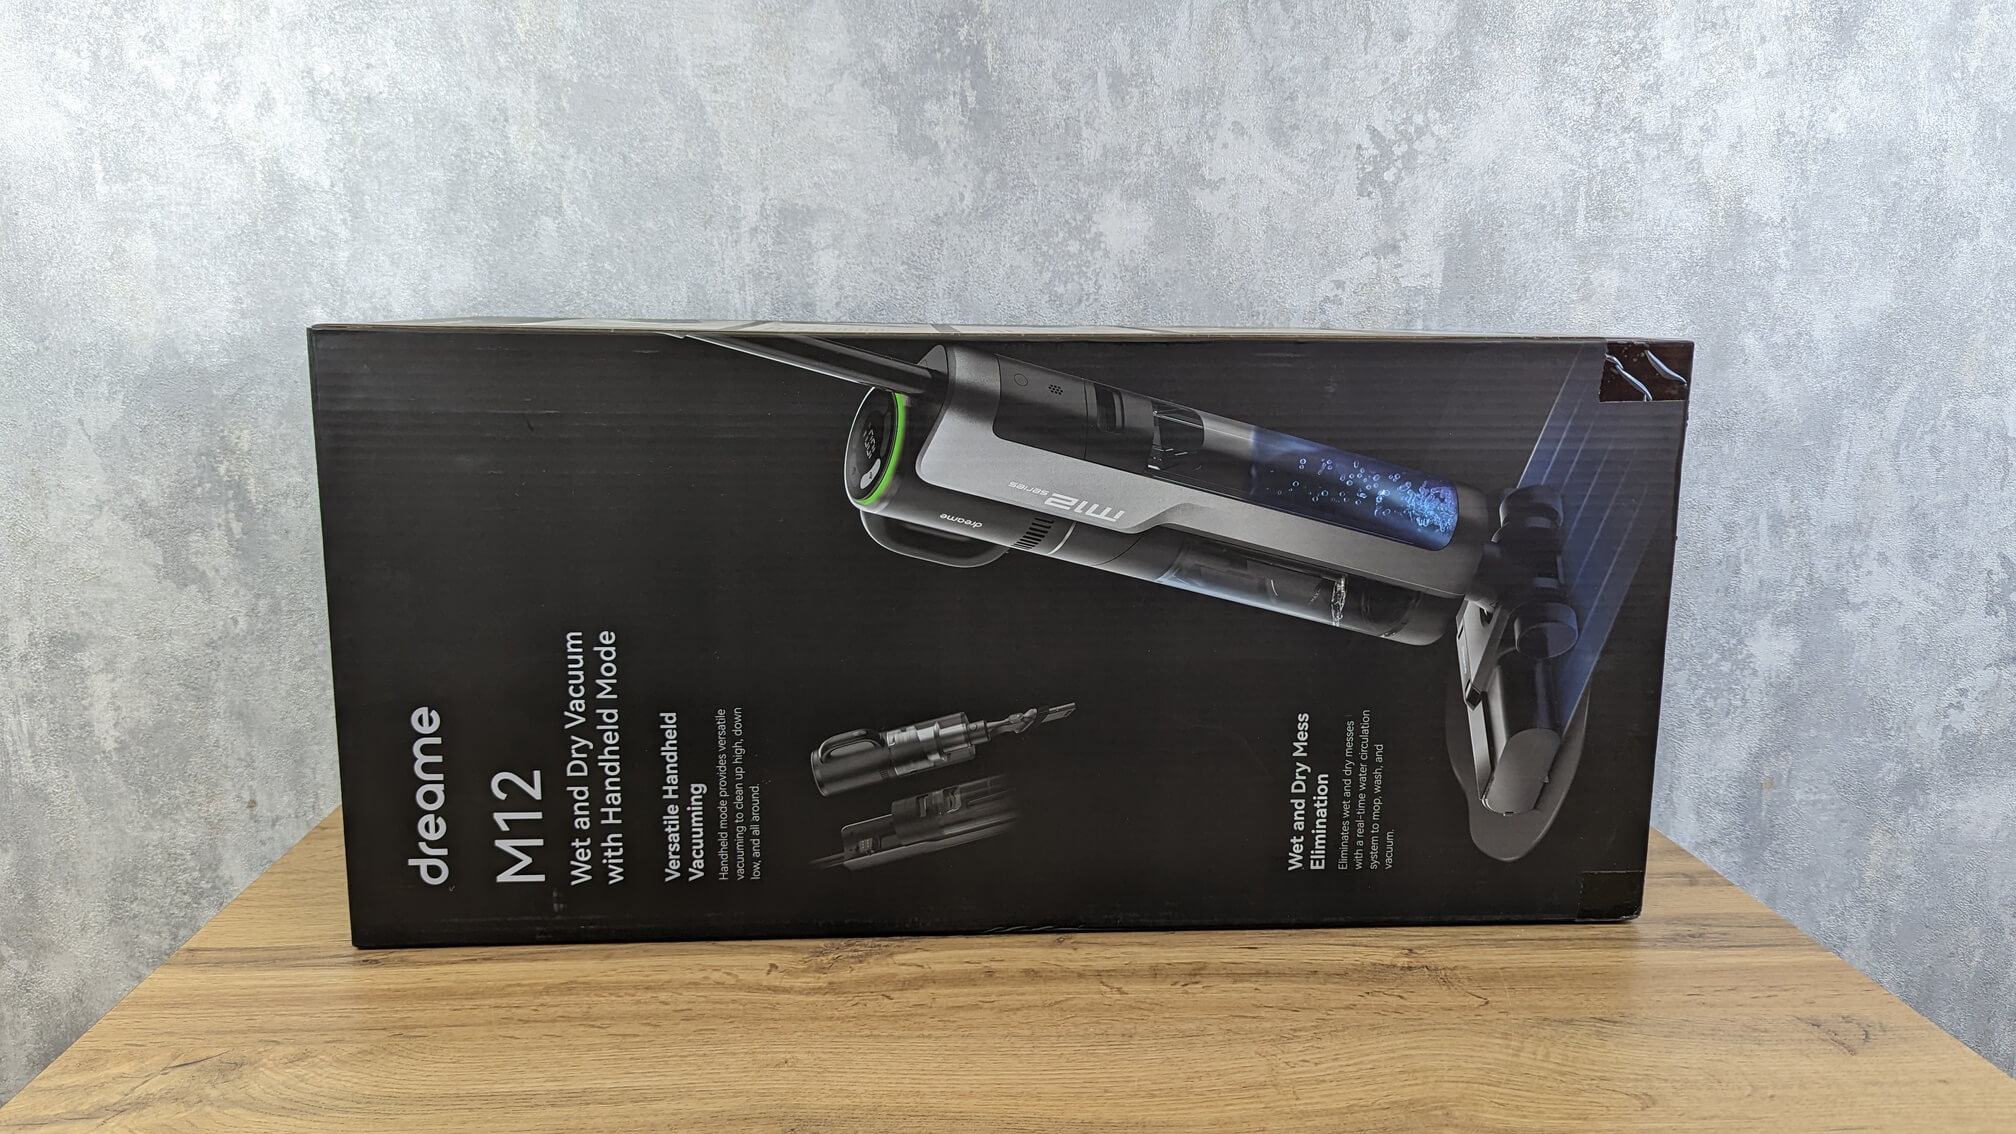 Dreame M12 Review & Test: what is this vacuum capable of? | alle Staubsauger